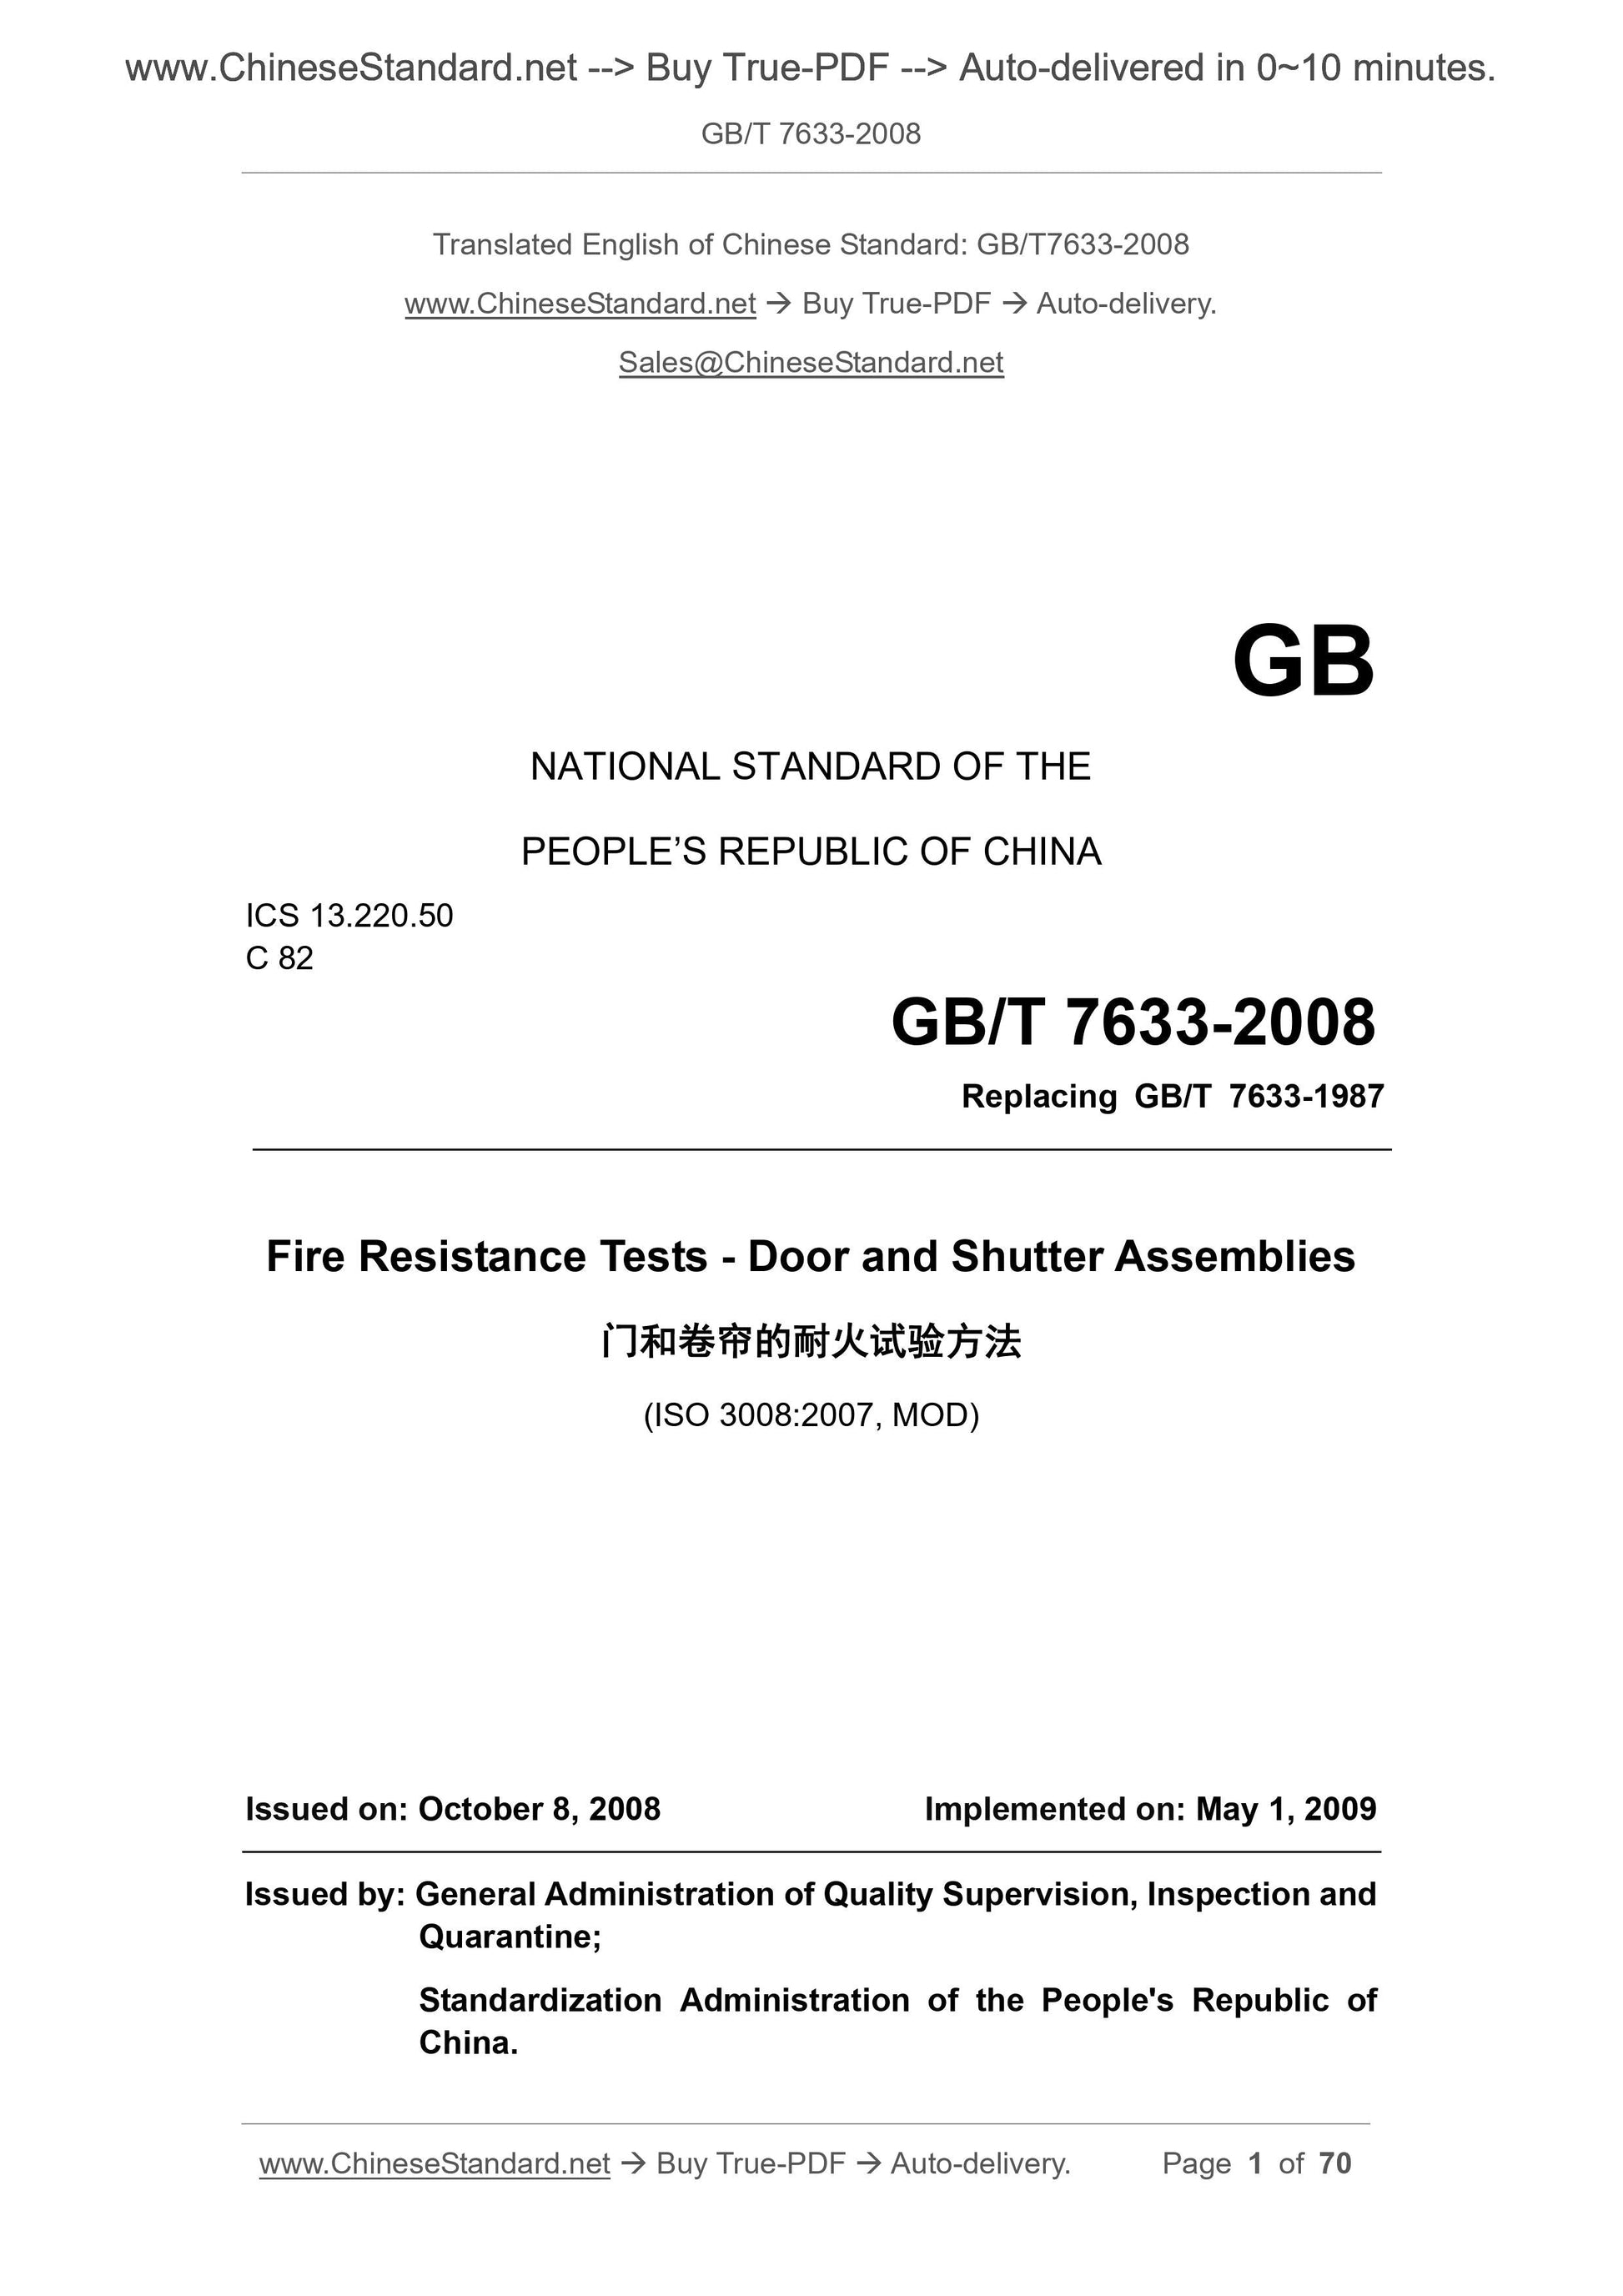 GB/T 7633-2008 Page 1